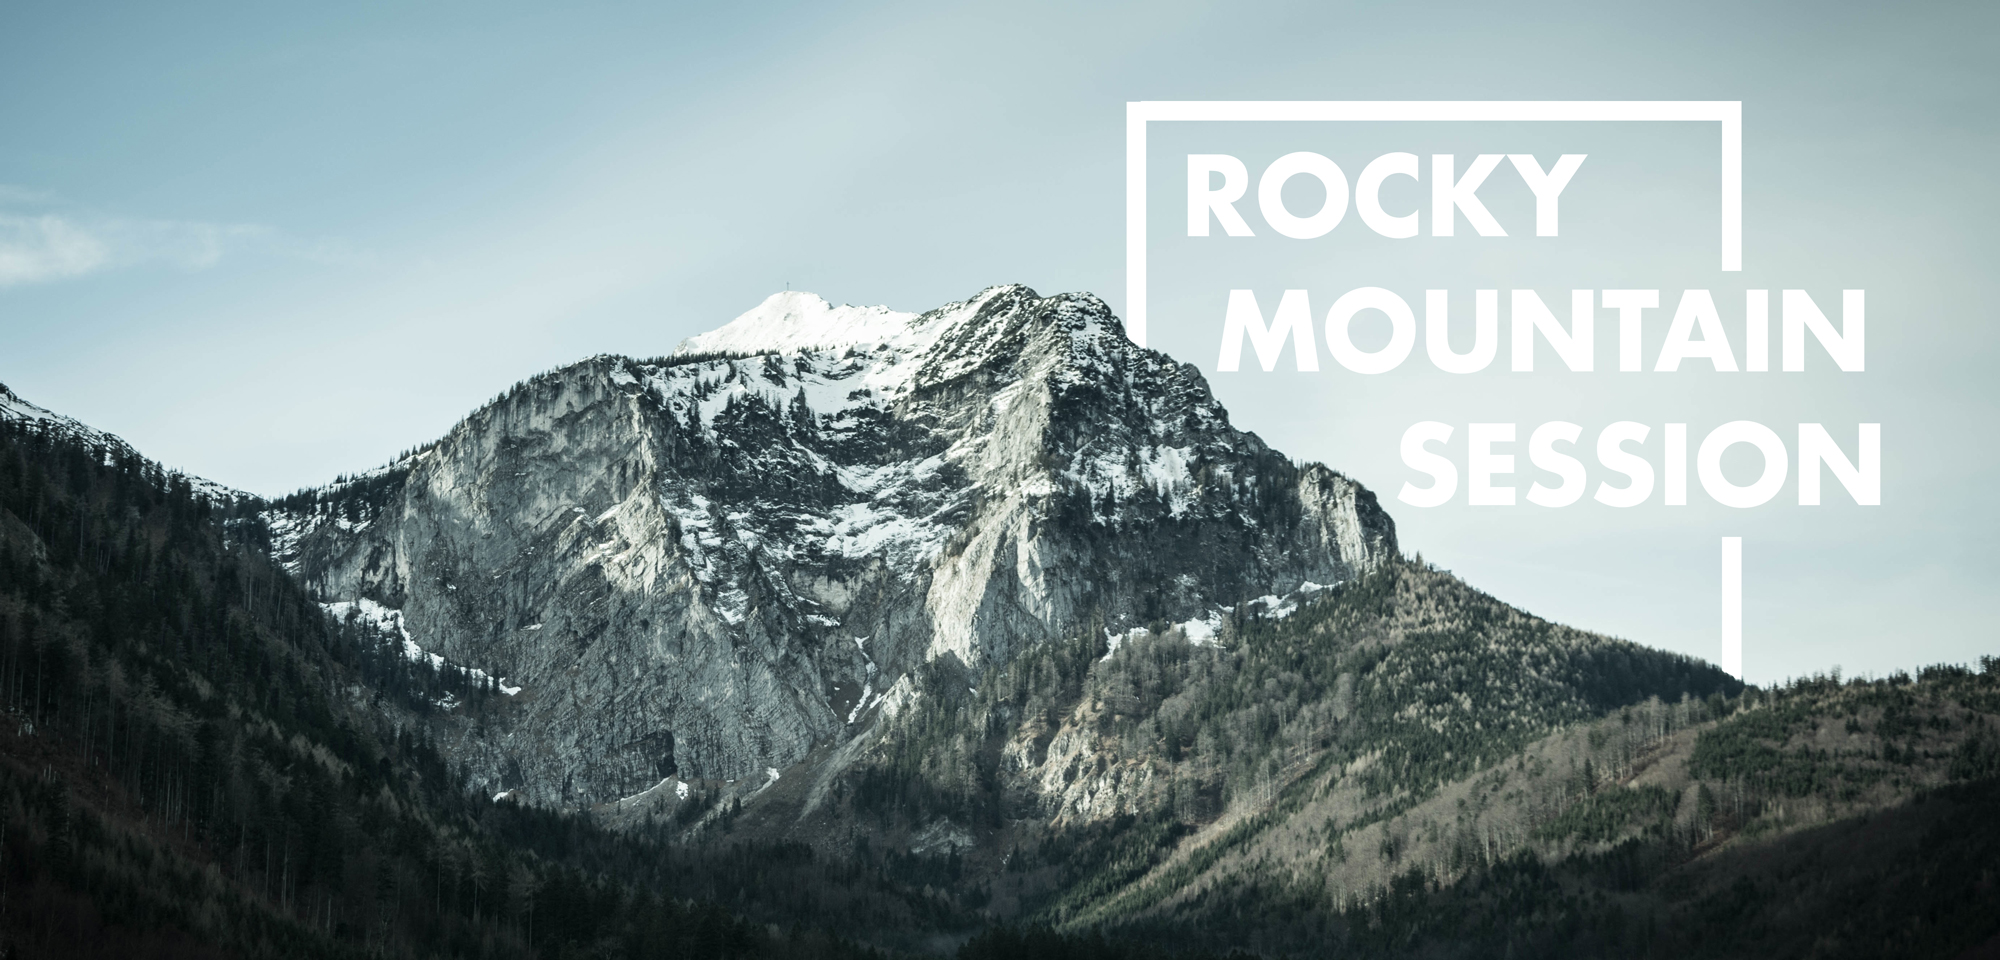 The Rocky Mountain Session 2017